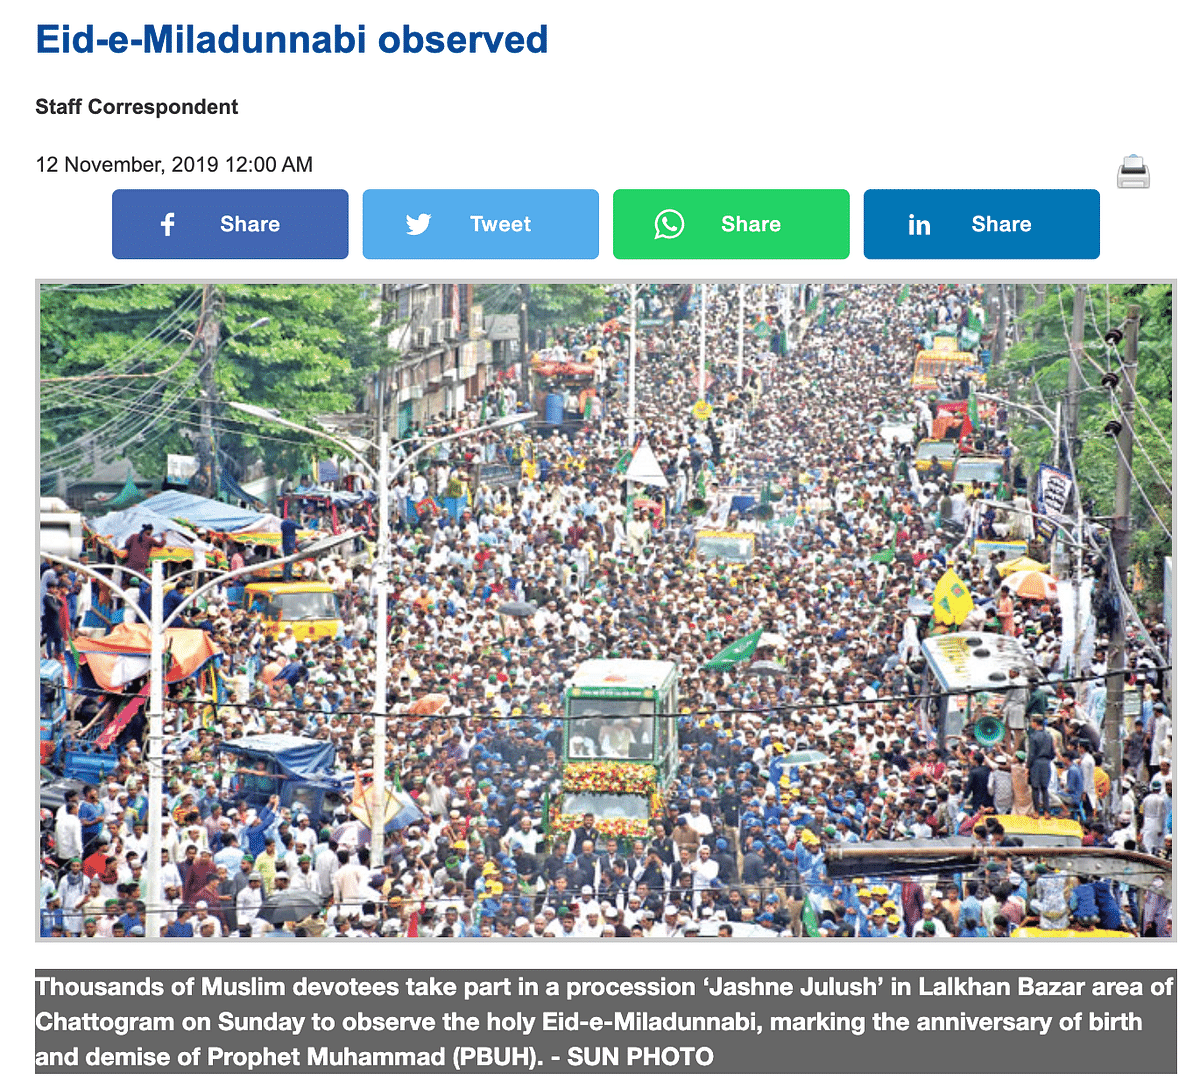 The image is from Chittagong, Bangladesh, in 2019 where devotees took part in a religious procession. 